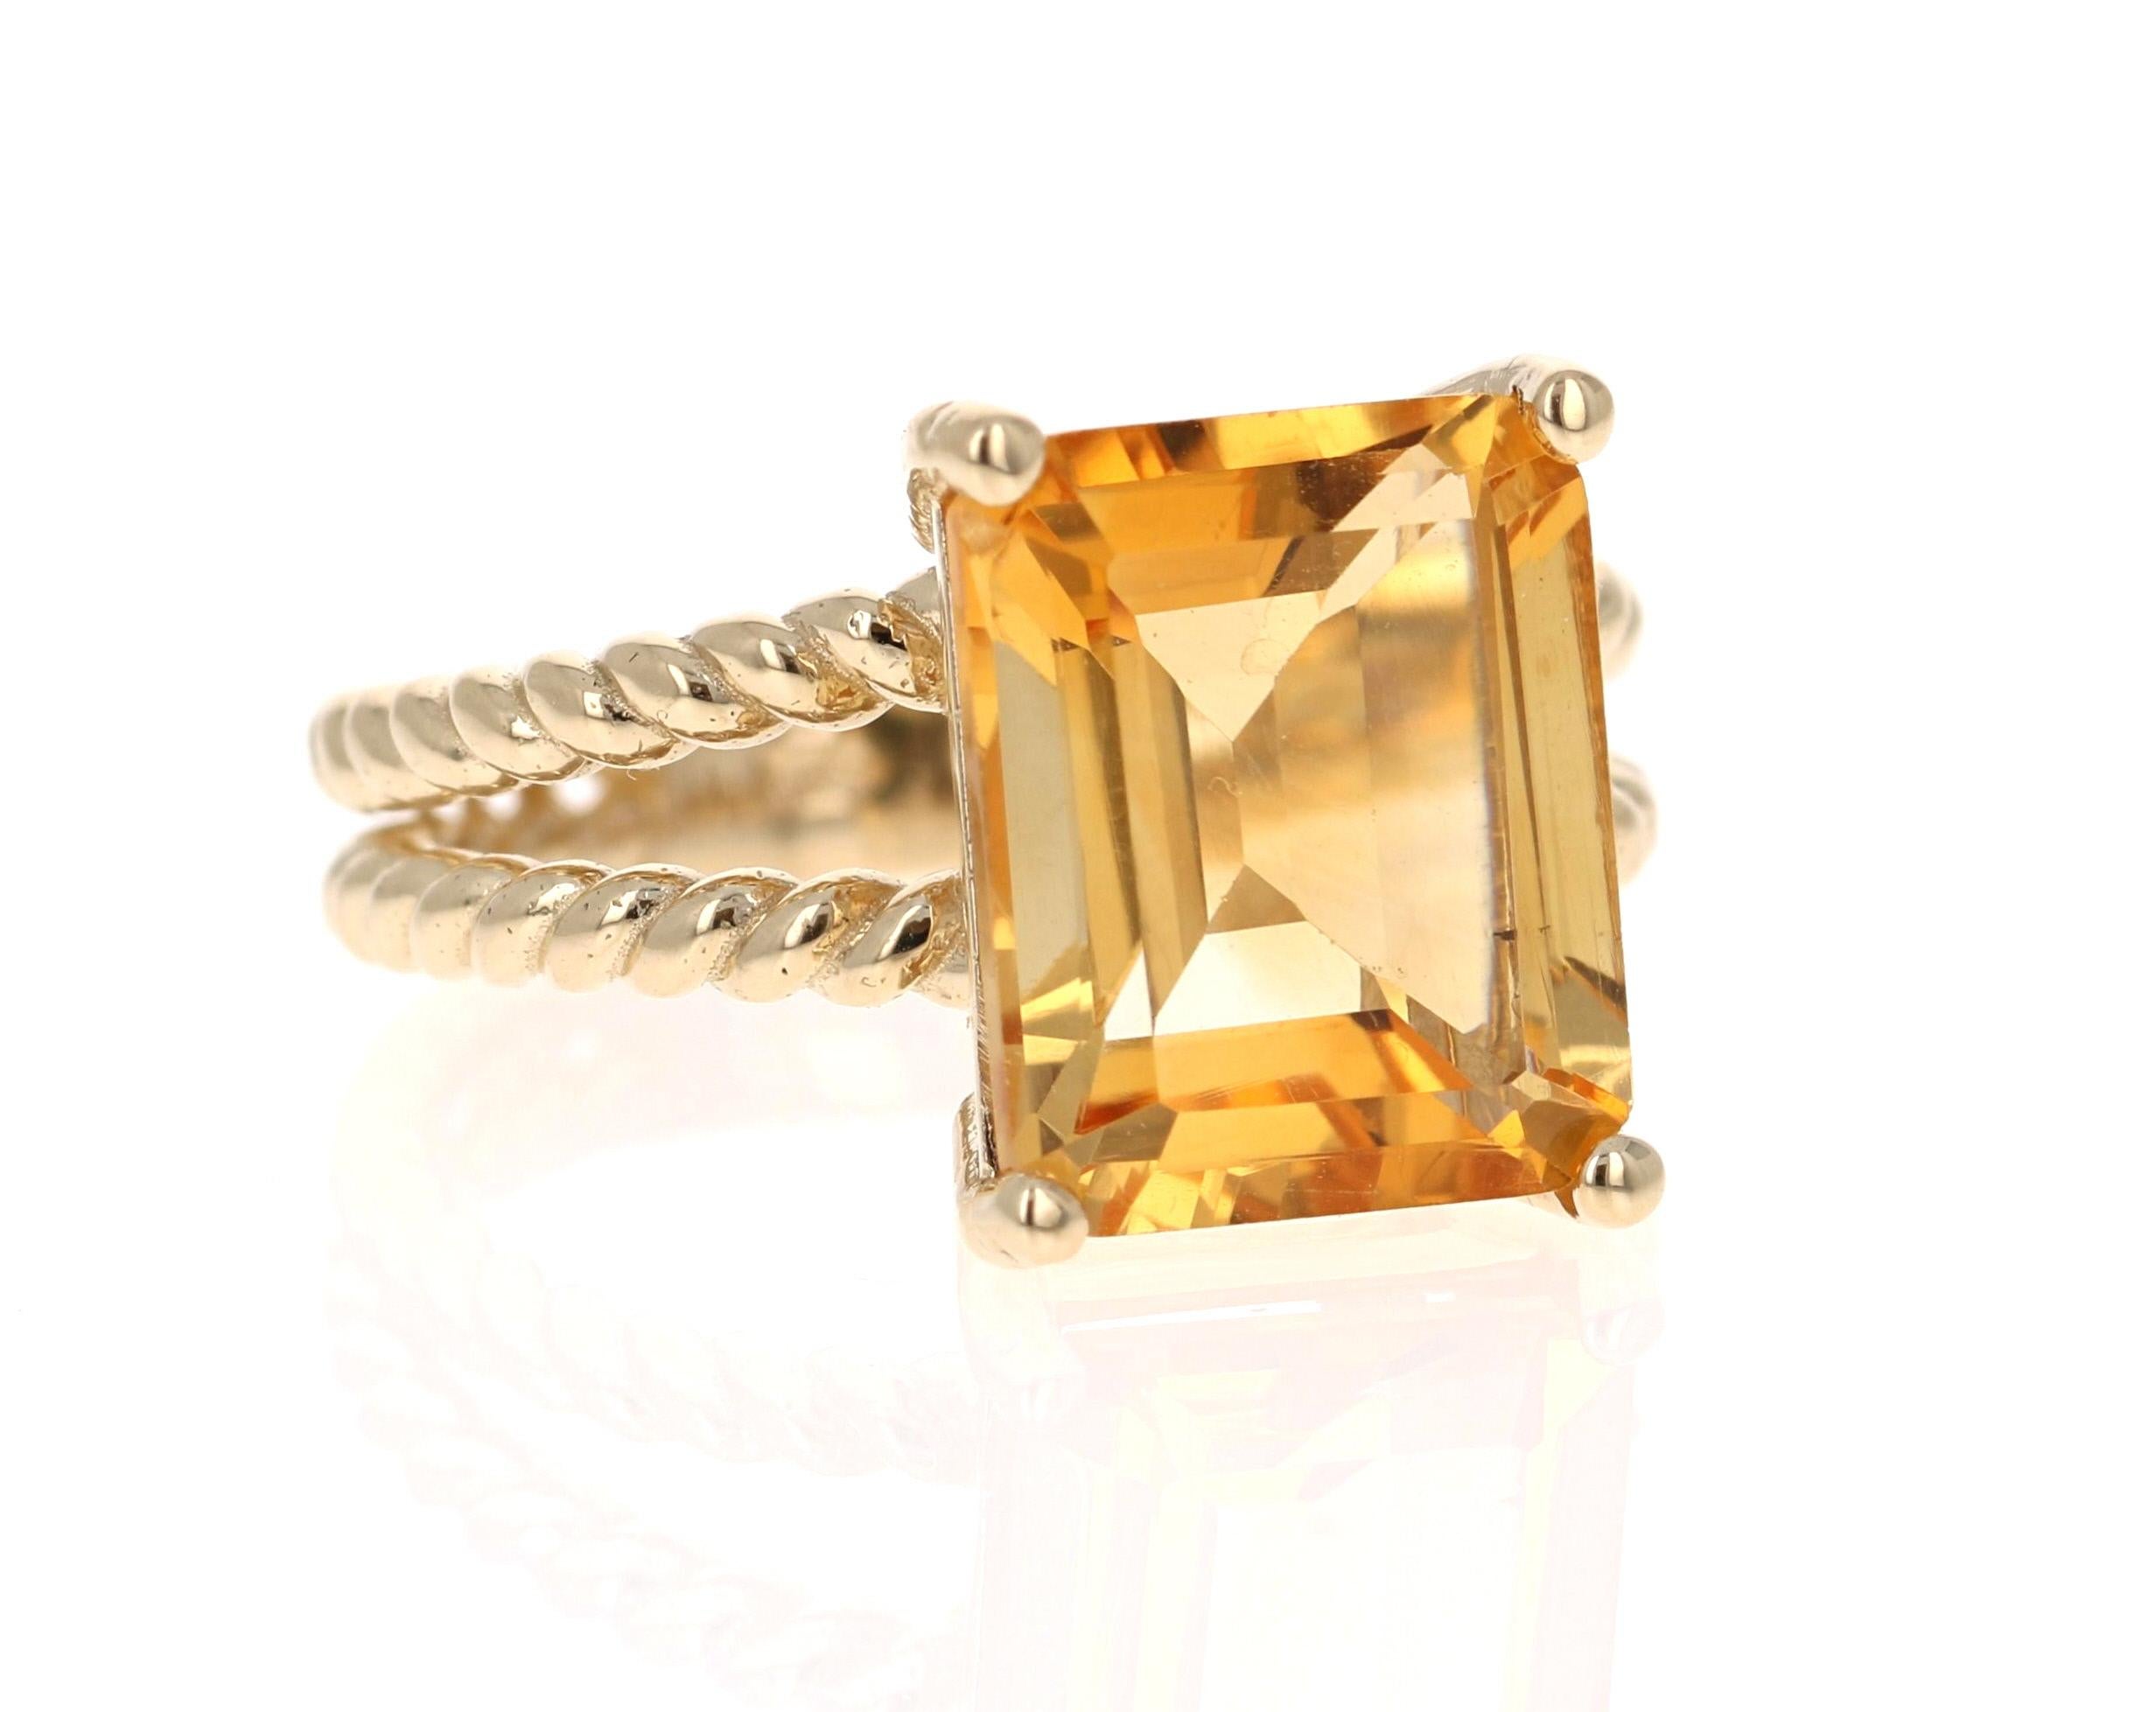 This beautiful, designer inspired ring has a bright and vivid Emerald Cut Citrine Quartz in the center that weighs 5.31 Carats. 
The setting is beautifully crafted in 14K Yellow Gold and weighs approximately 5.2 grams.
The ring is a size 7 and can